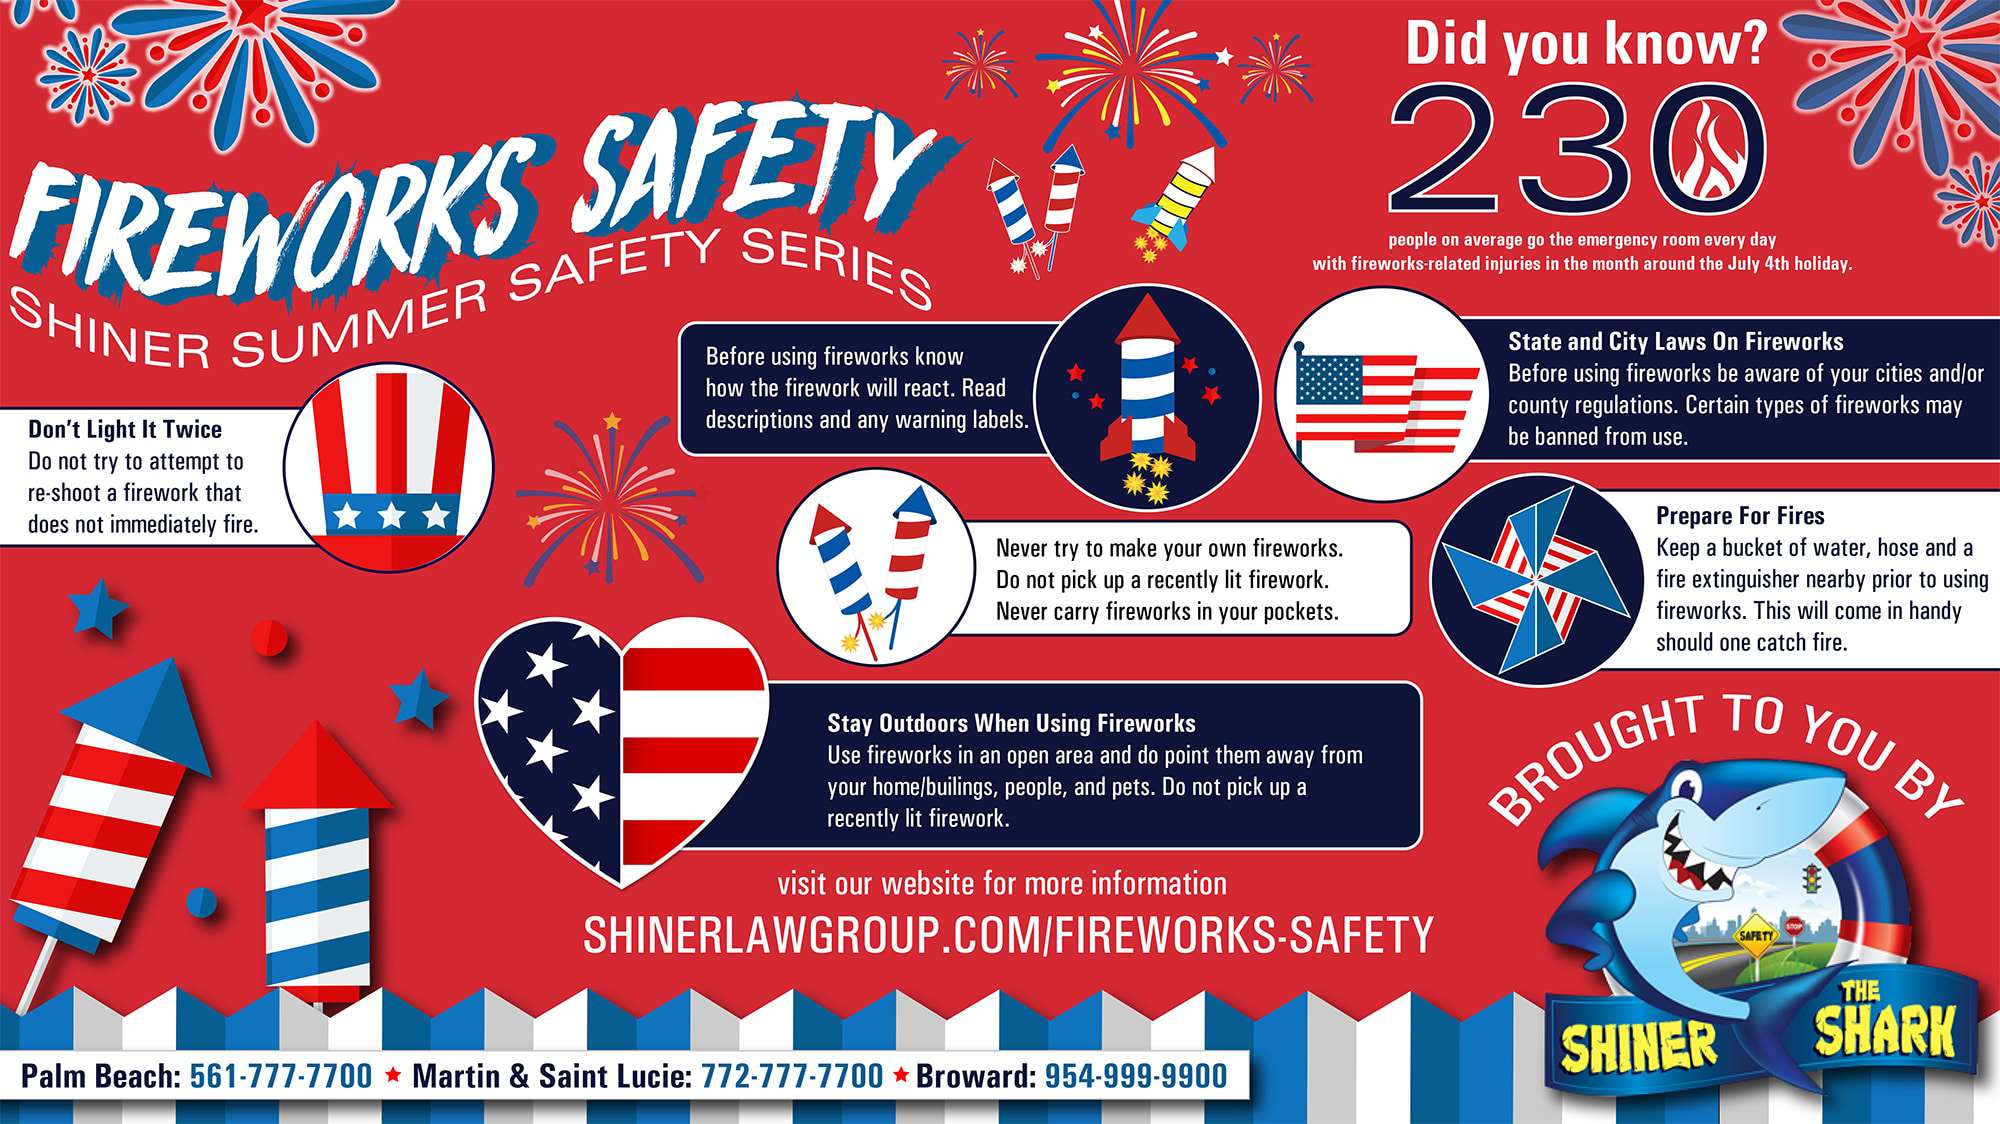 Fireworks Safety 4th of July Shiner Summer Series David Shiner Law Group Palm beach County Injury Lawyer